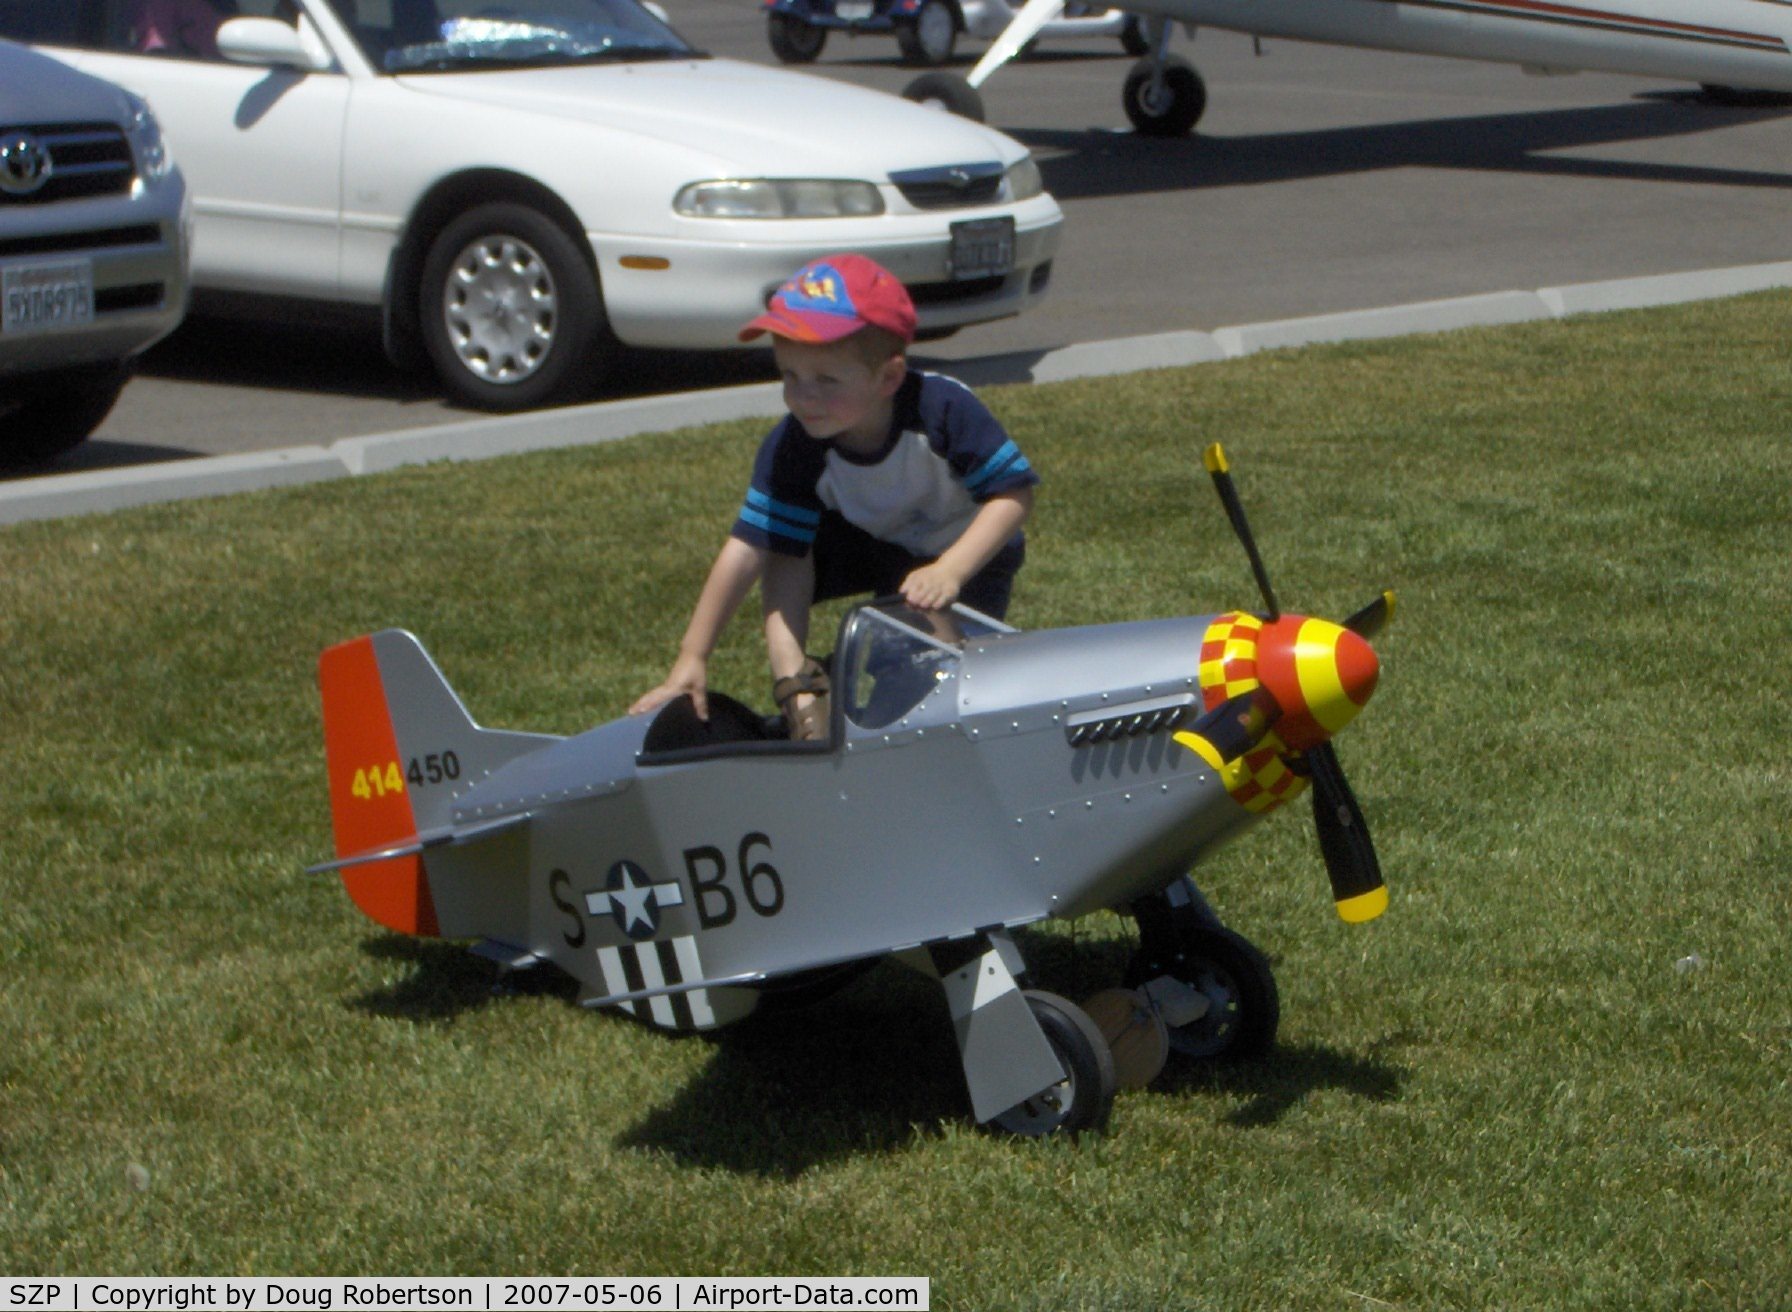 Santa Paula Airport (SZP) - P-51 MUSTANG Pedal Plane-3-4 year old power, prop turns while taxiing-(would you expect otherwise?), plans-built by Dad